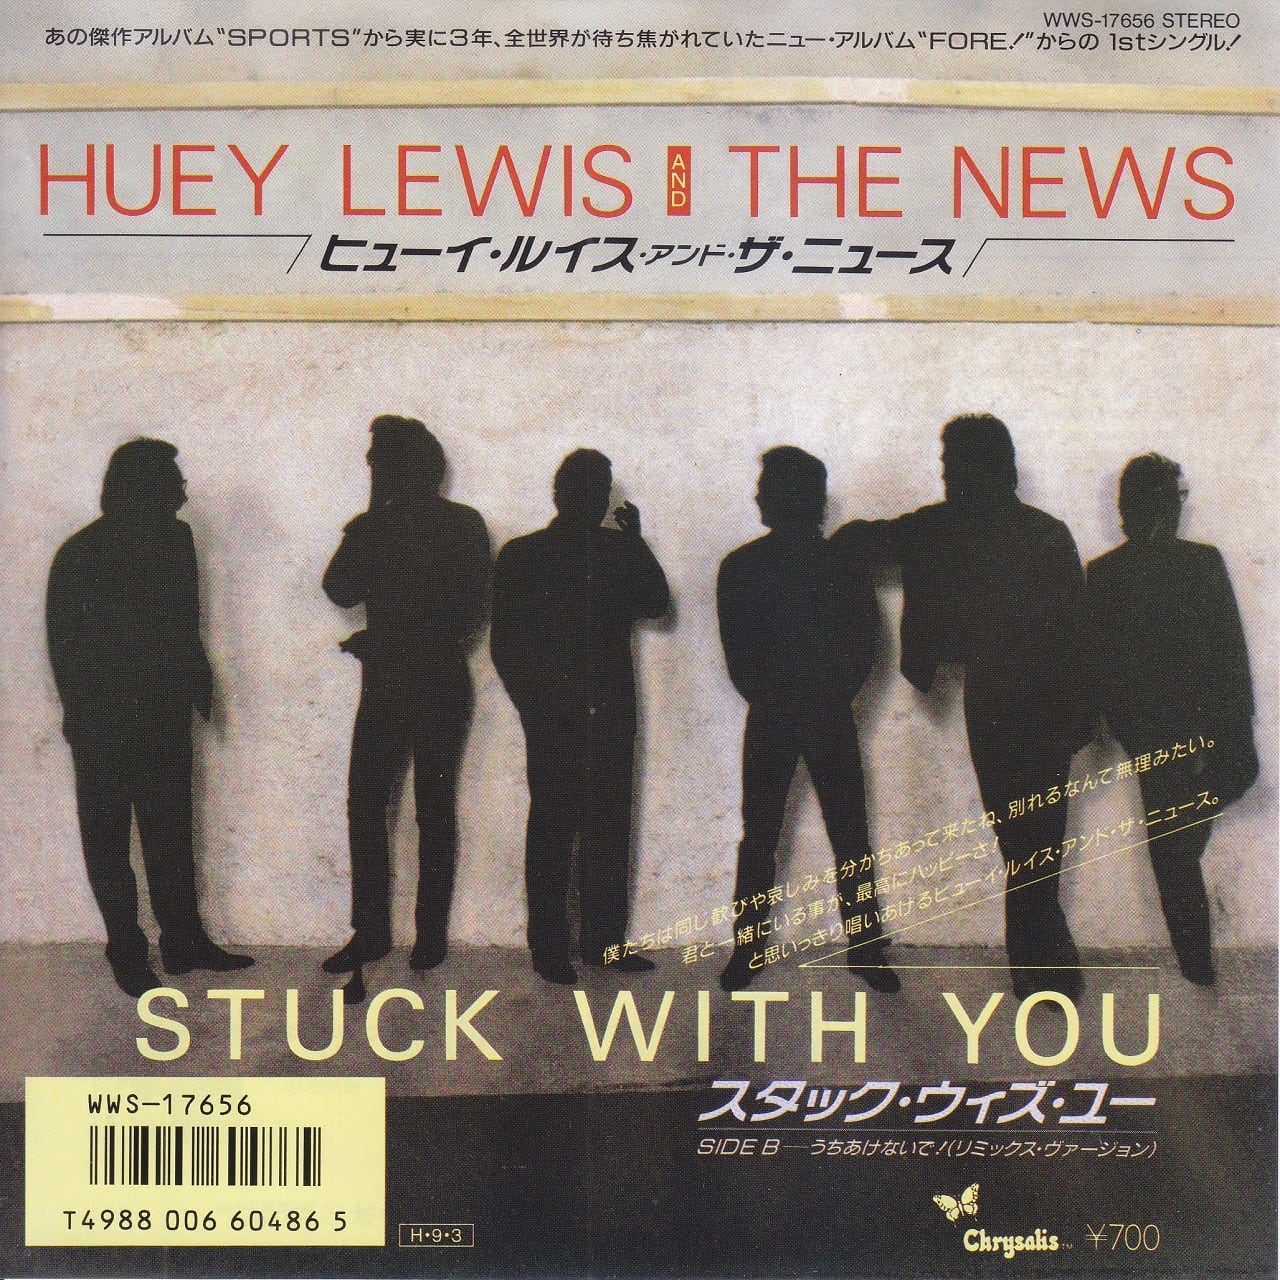 【7inch】Huey Lewis And The News - Stuck With You  スタック・ウィズ・ユー／ヒューイ・ルイスアンド・ザ・ニュース (1986.07.) 45rpm